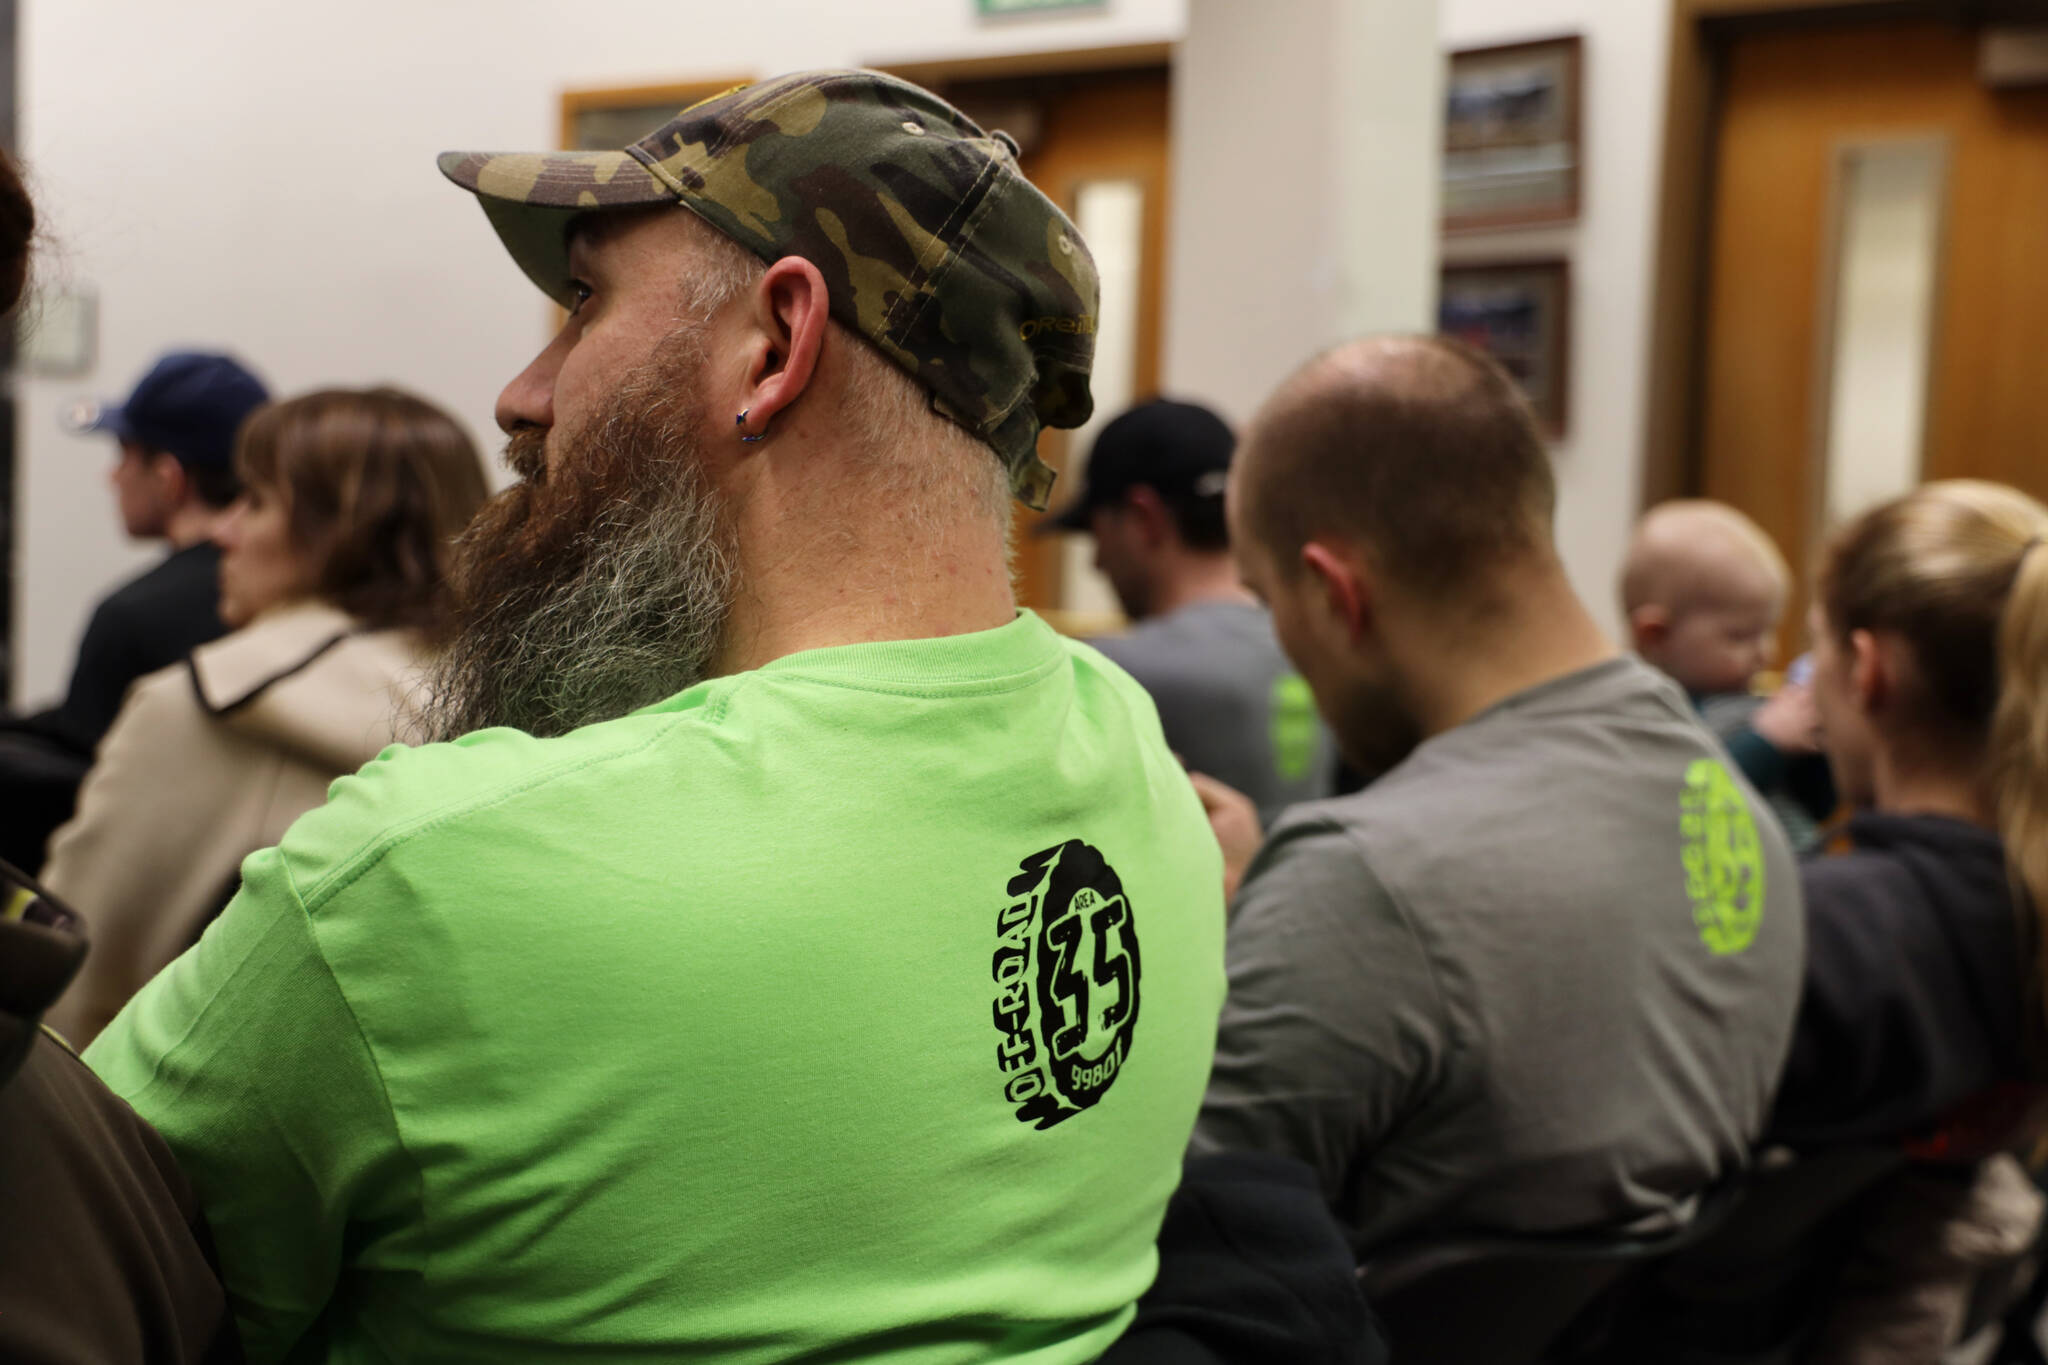 Residents wear matching shirts in advocacy for the proposed off-road vehicle riding park at 35 Mile, which was up for permit consideration and later approved at a January evening Planning Commission meeting. (Clarise Larson / Juneau Empire File)